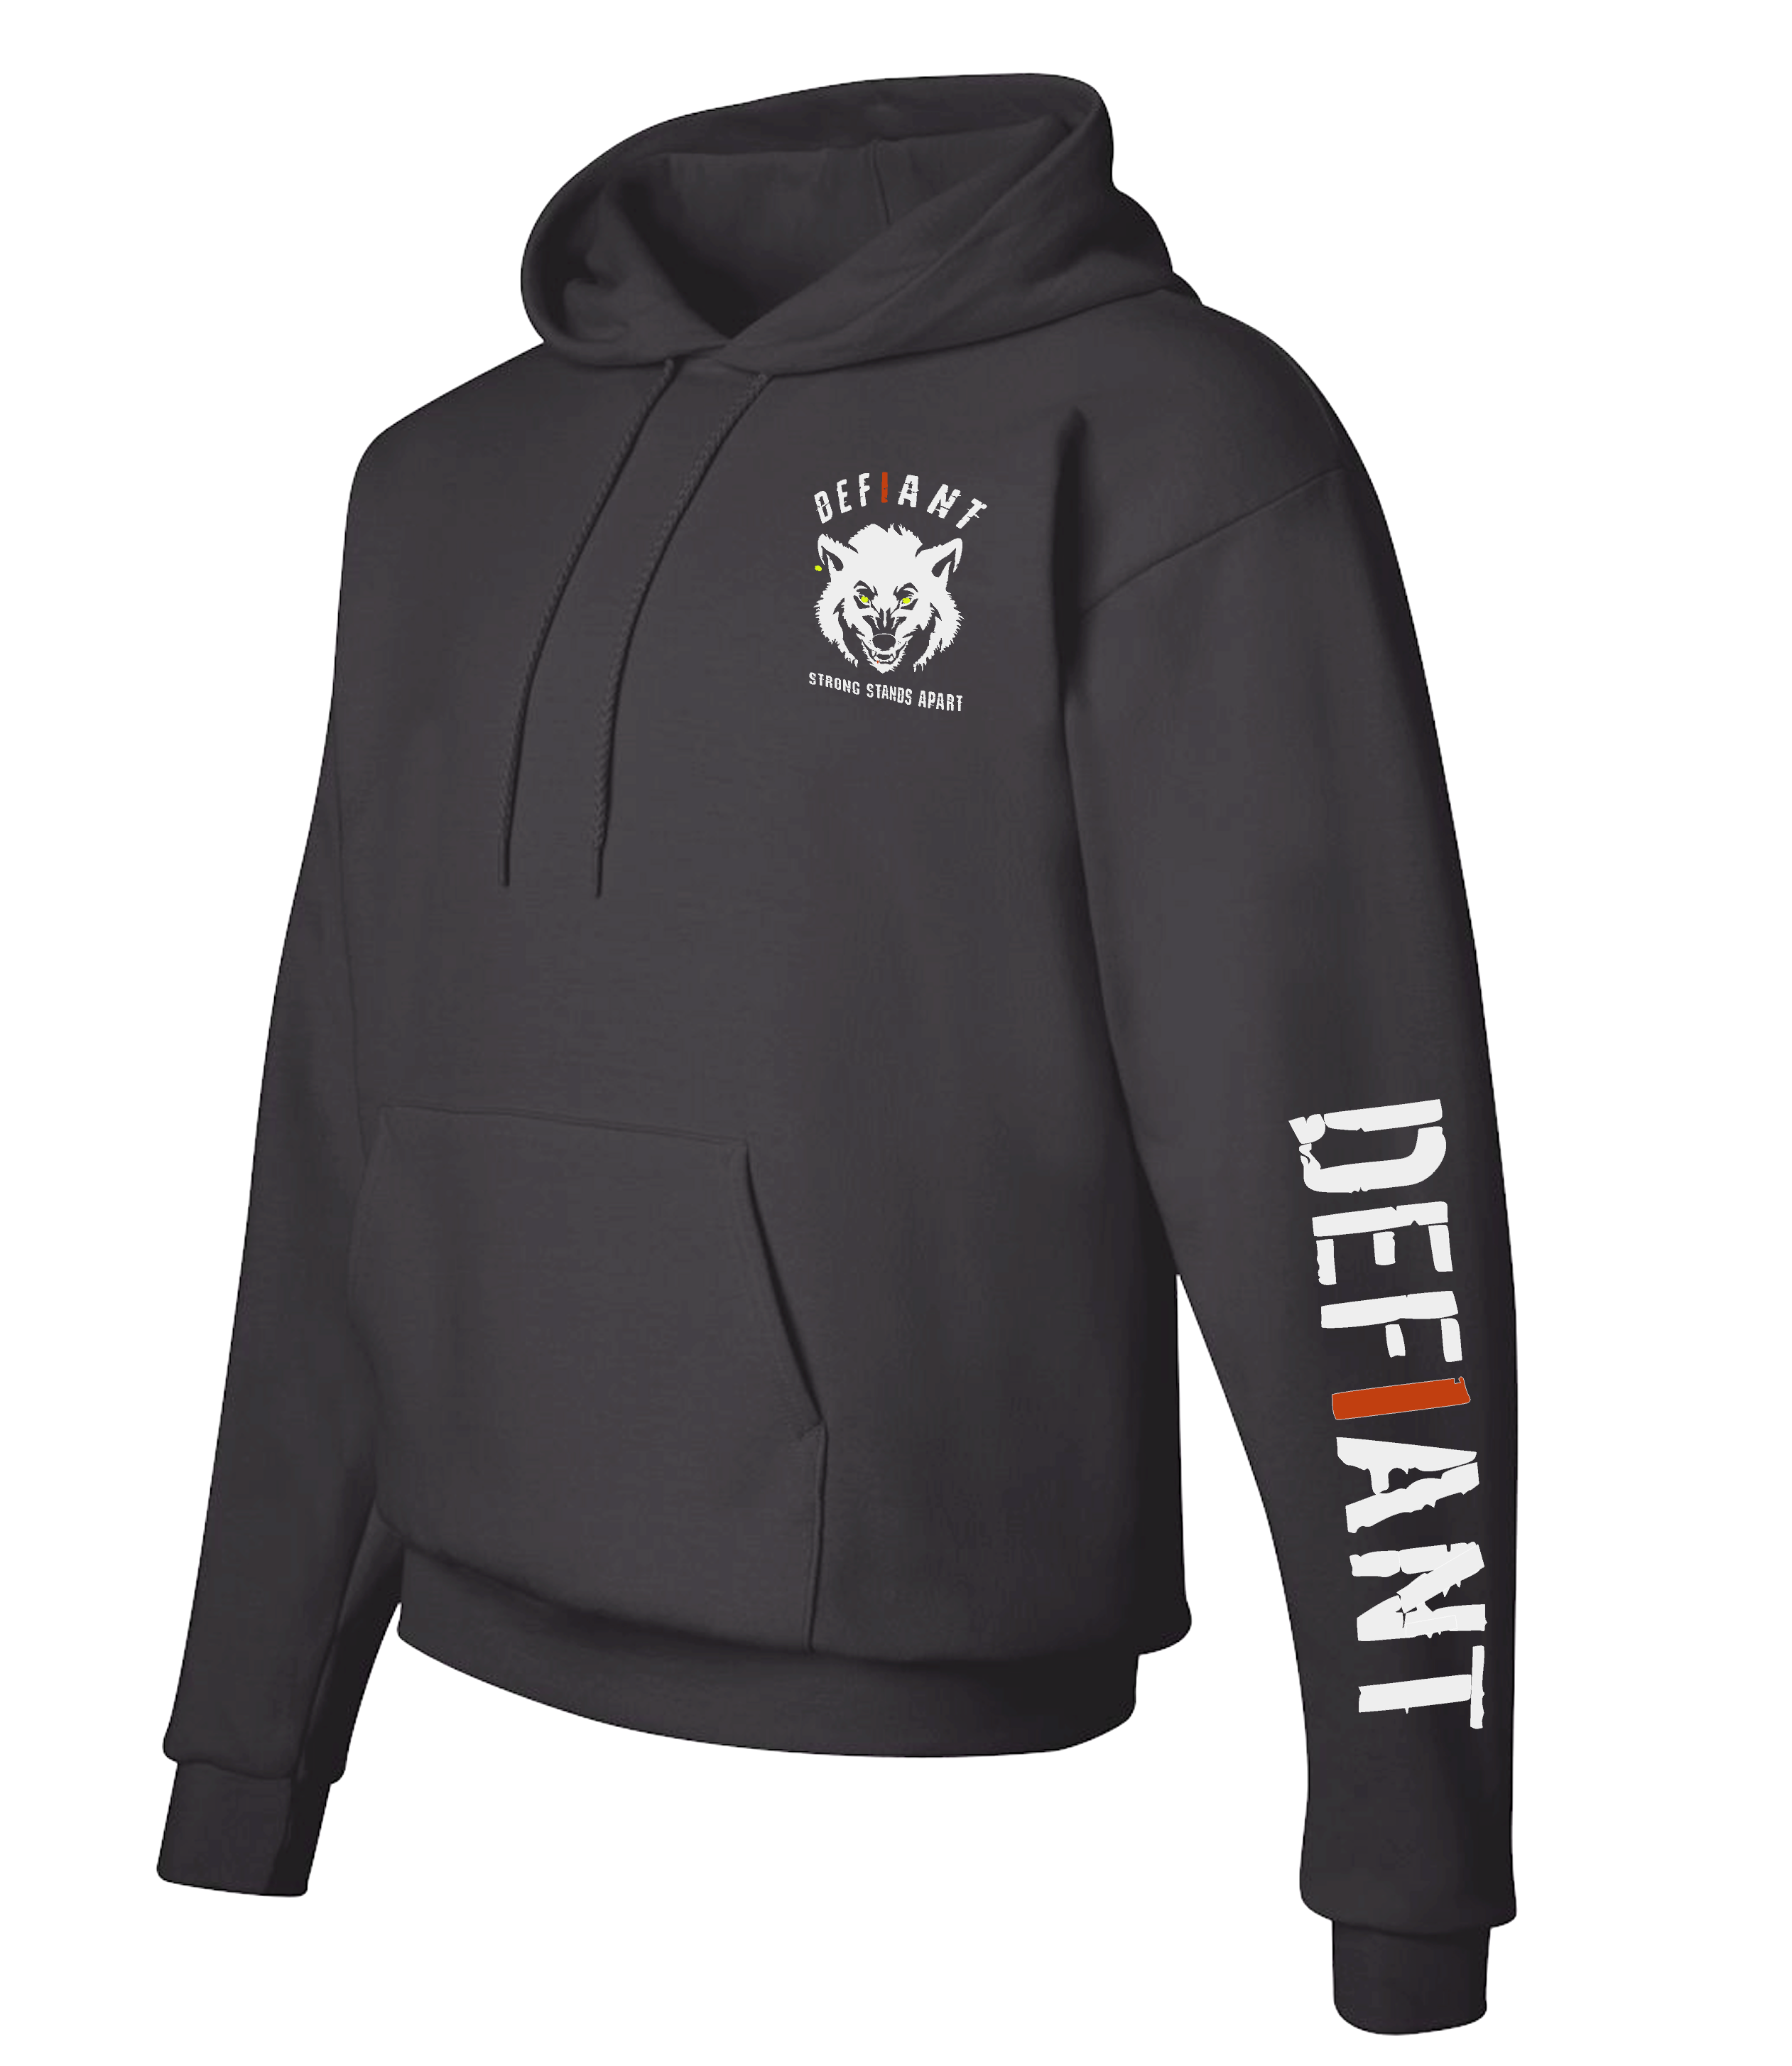 NEW! - WEAR YOUR DEFIANCE ON YOUR SLEEVE - LIGHT WEIGHT HOODIE - TRUE BLACK